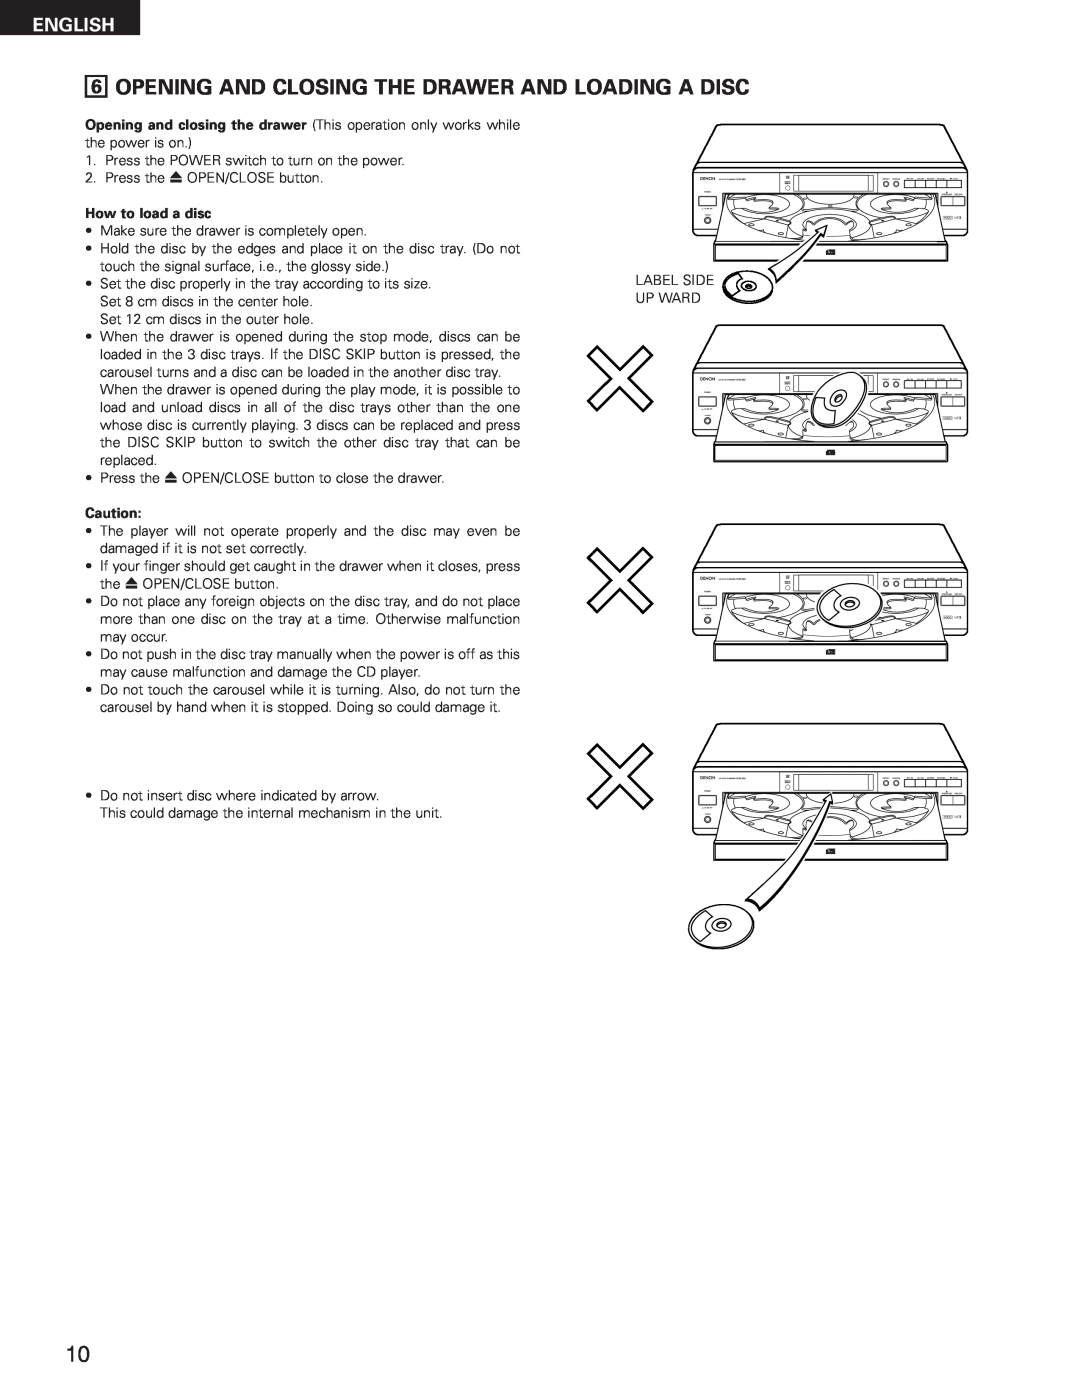 Denon DCM-280 operating instructions Opening And Closing The Drawer And Loading A Disc, How to load a disc, English 